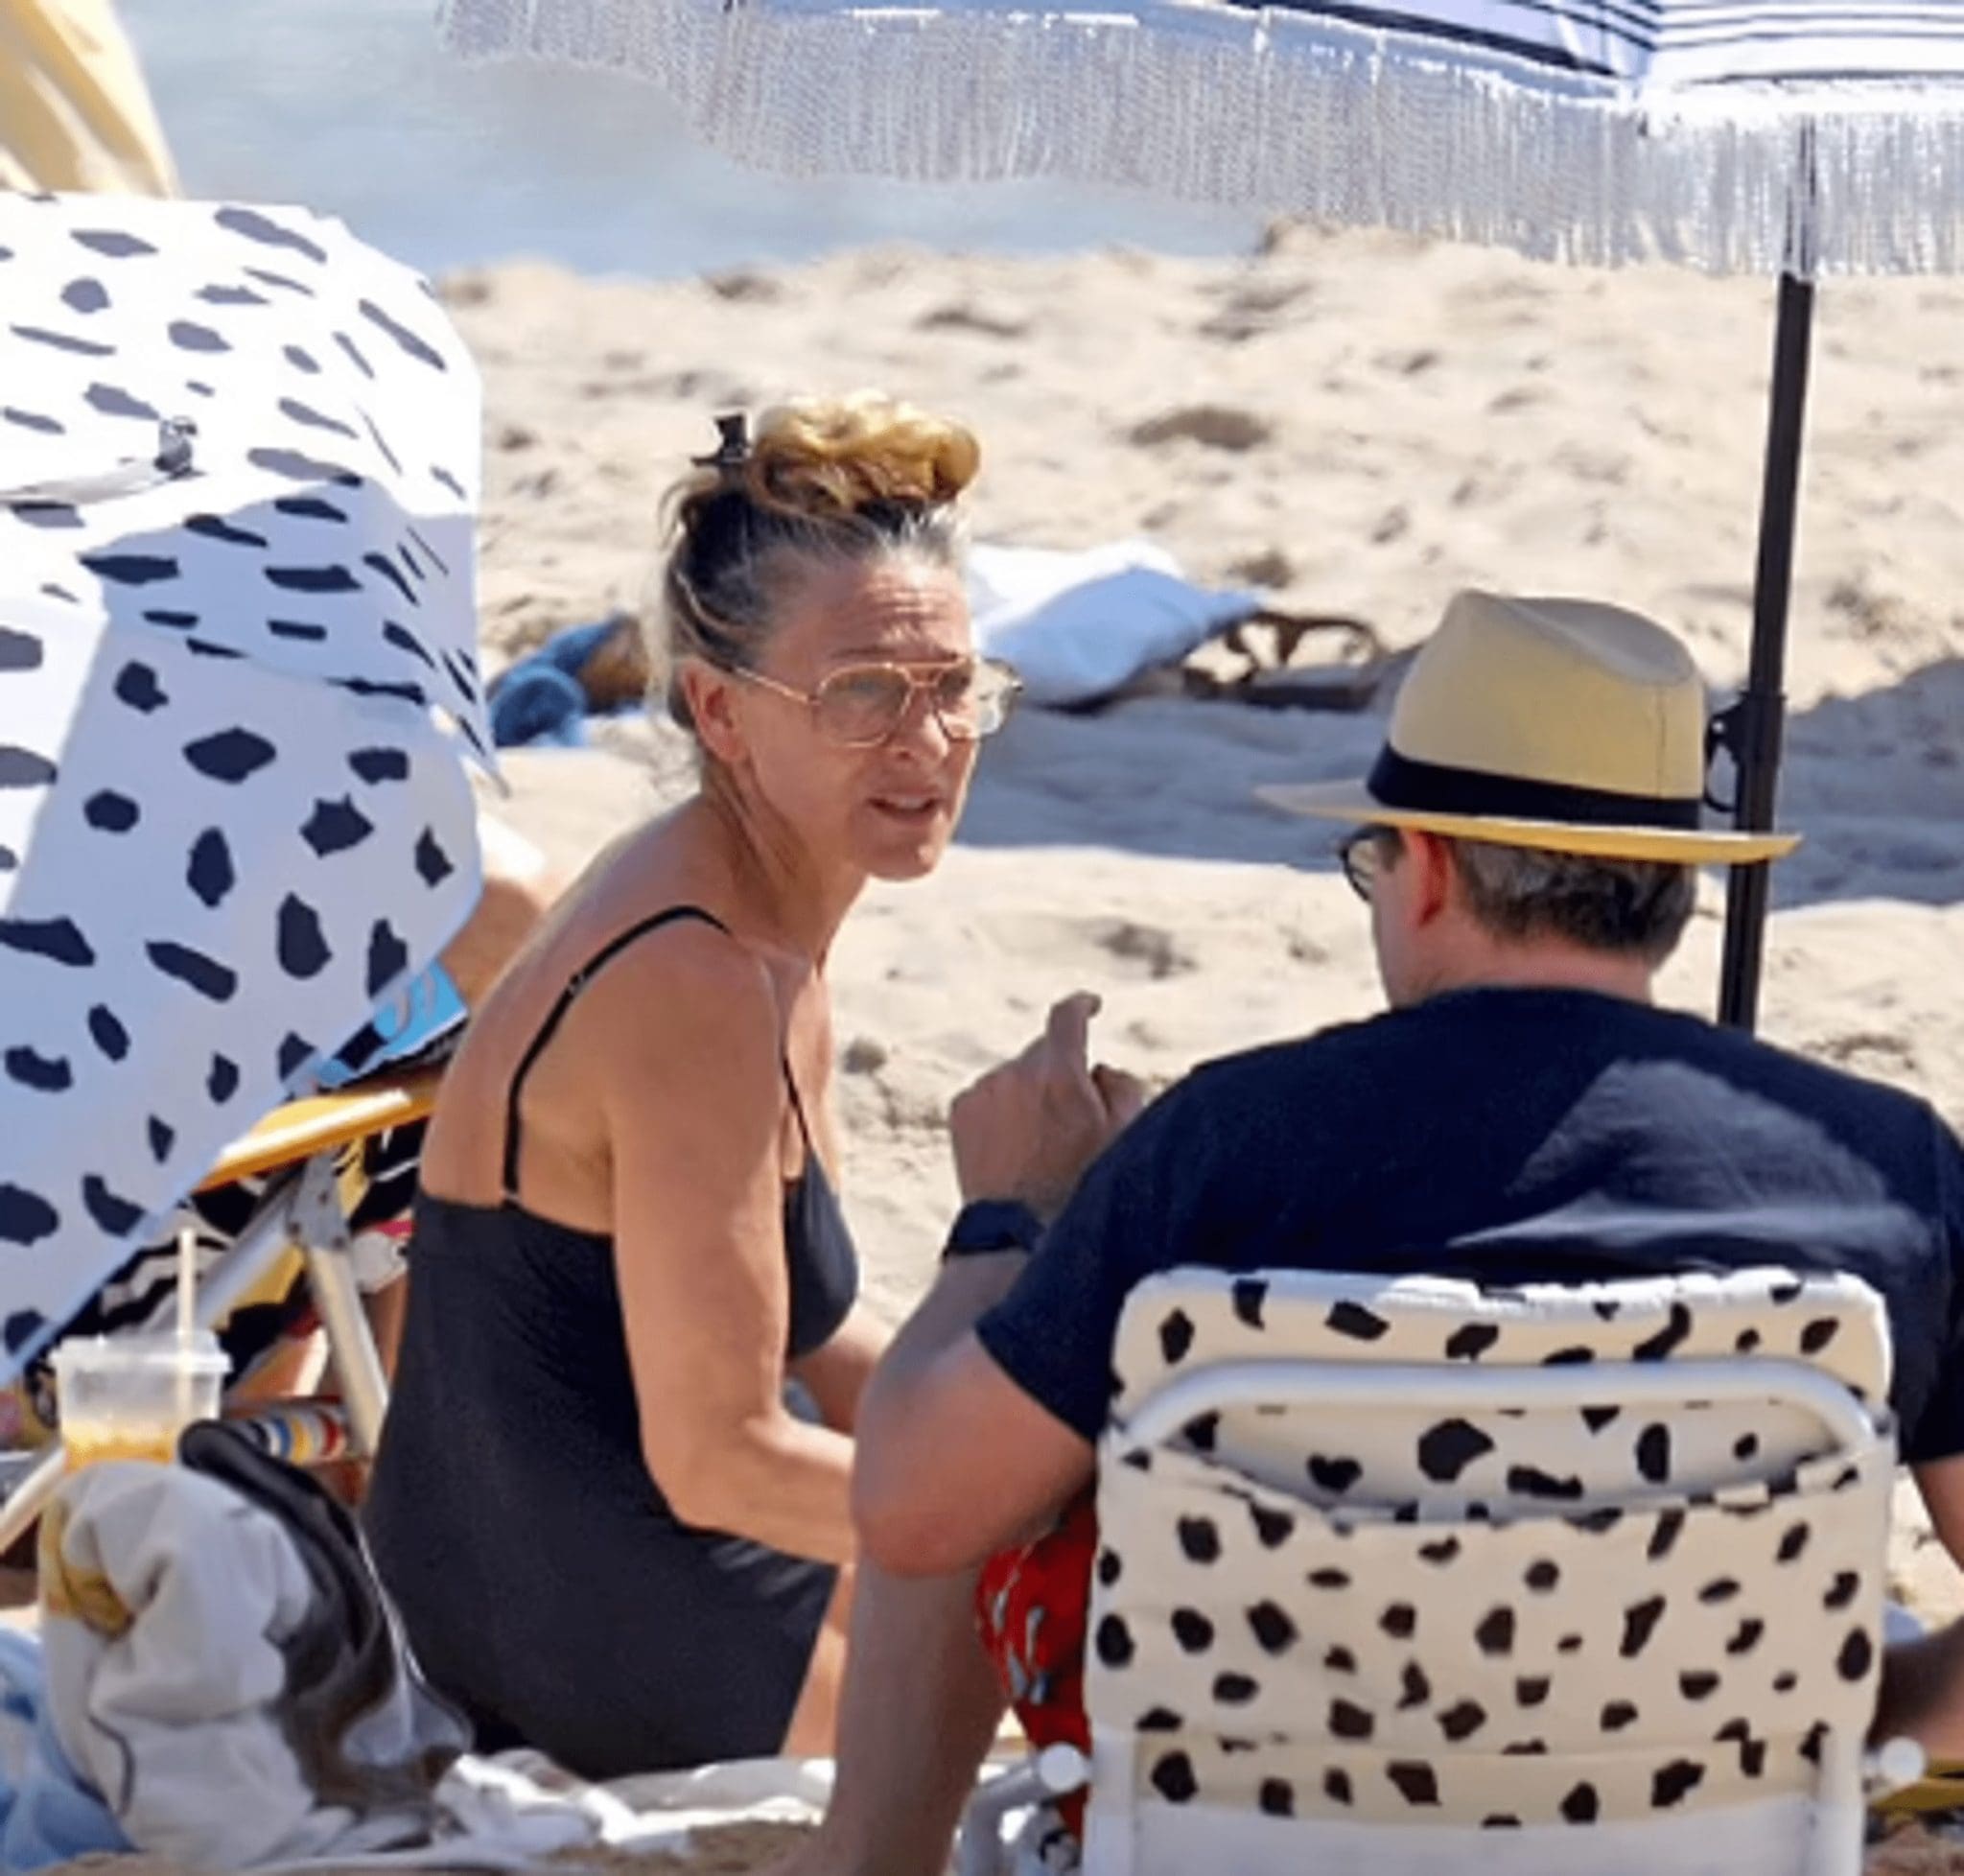 How a fan of natural aging Sarah Jessica Parker looks in a swimsuit